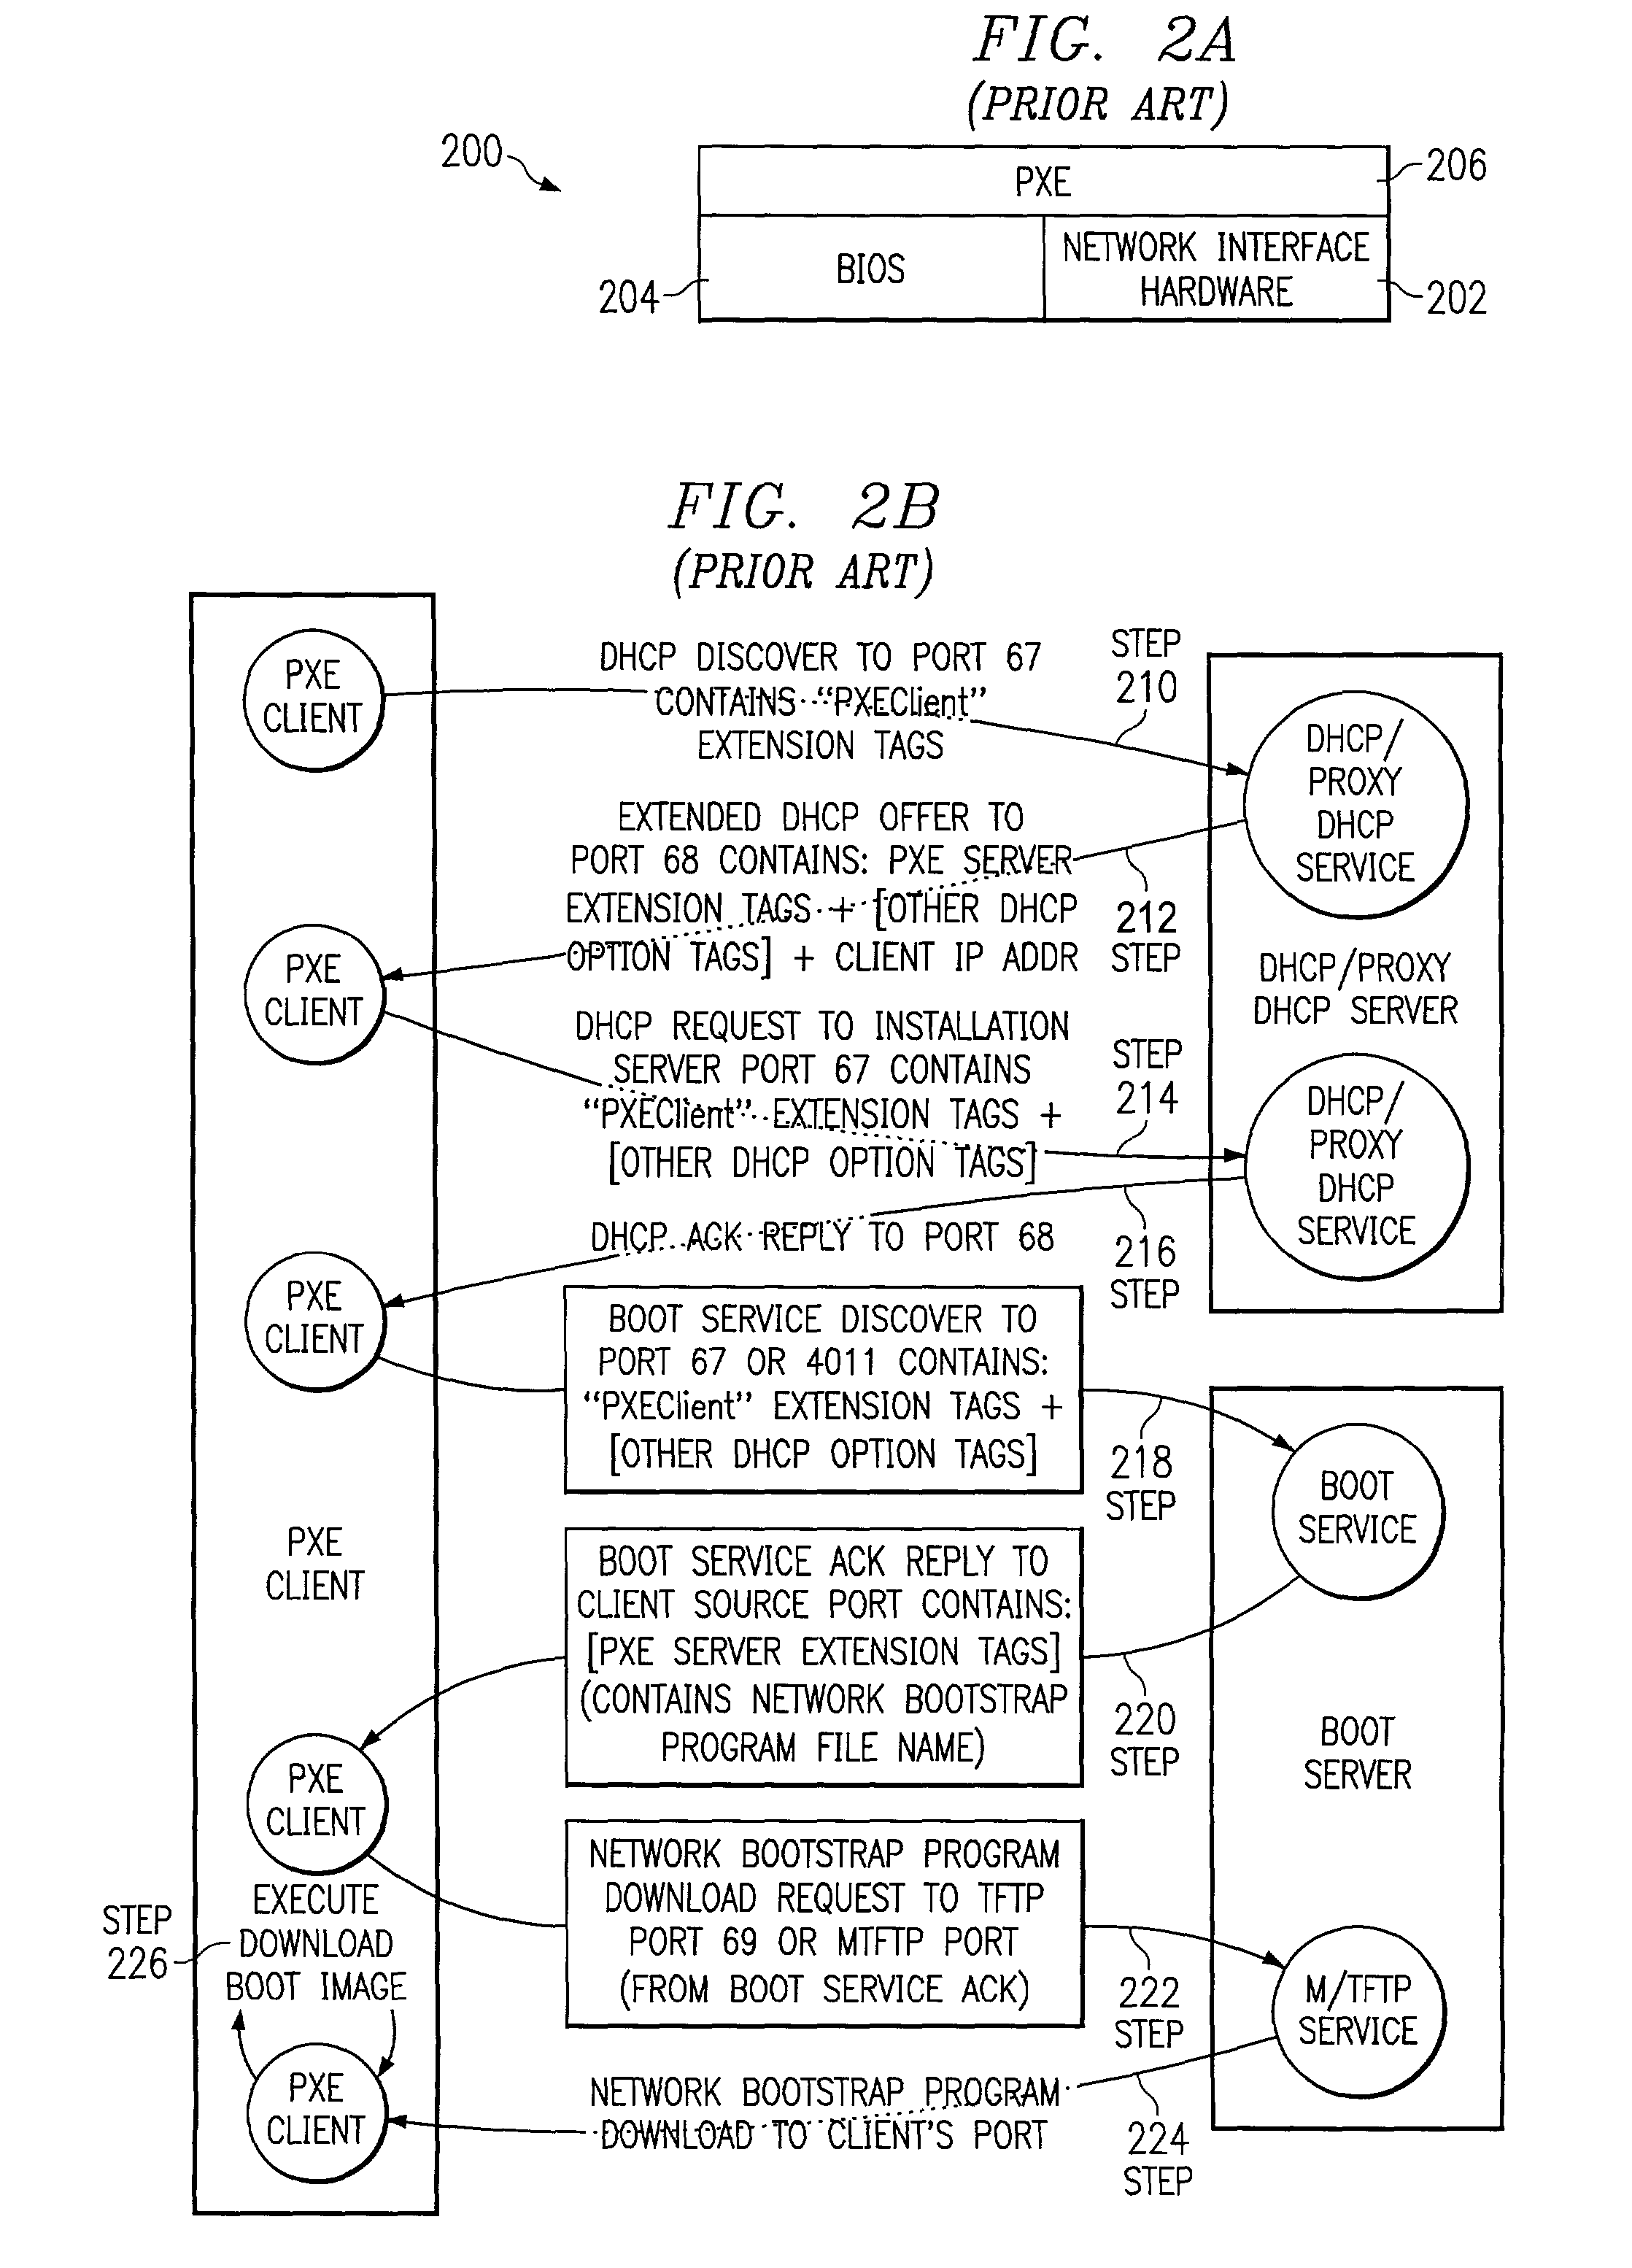 Method and system for dynamic redistribution of remote computer boot service in a network containing multiple boot servers